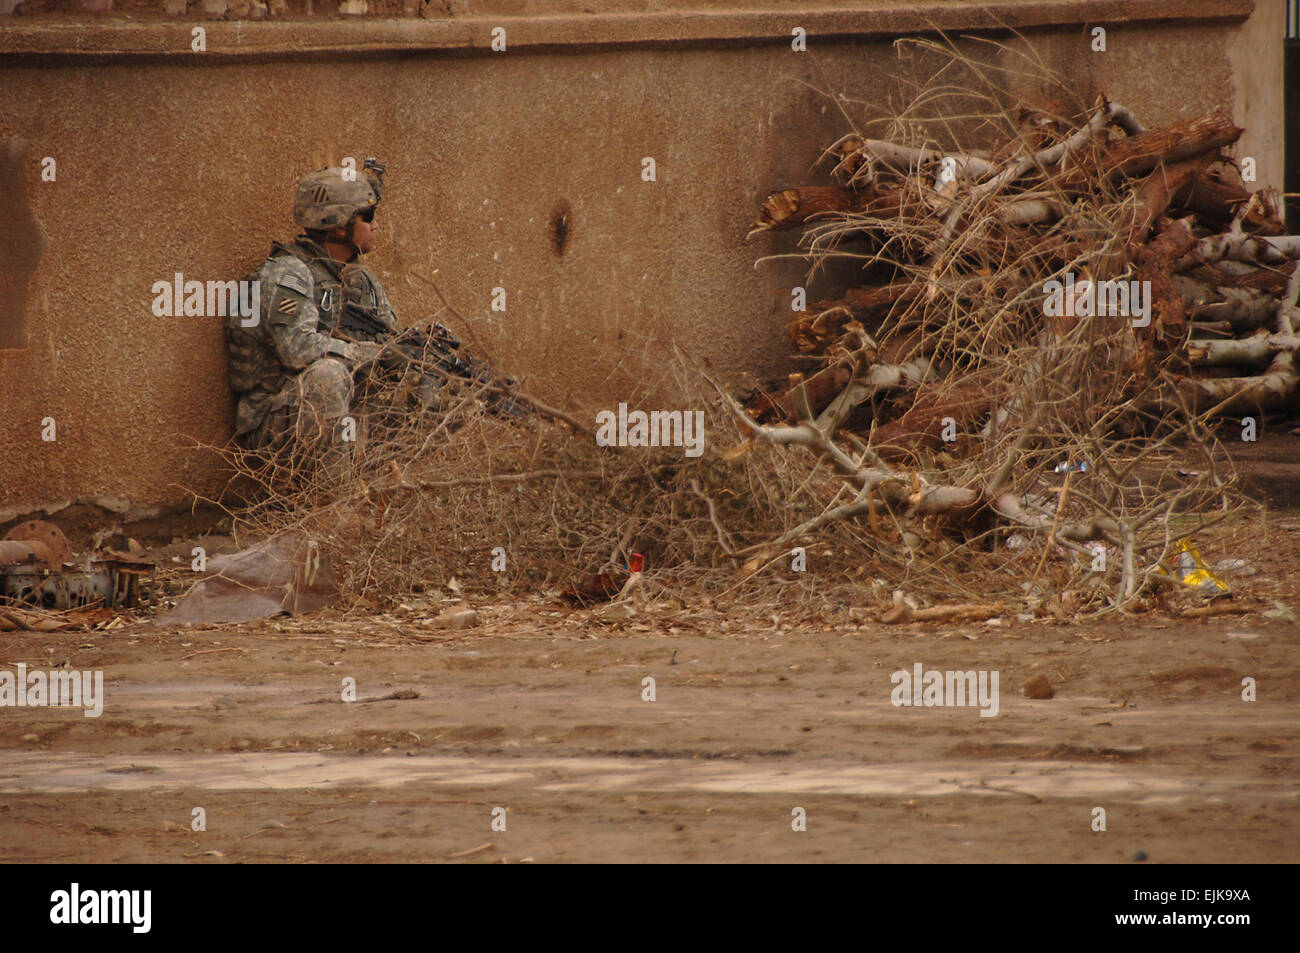 A U.S. Army Soldier from Baker Company, 1st Battalion, 15th Infantry Regiment, 3rd Heavy Brigade Combat Team, 3rd Infantry Division uses a pile of dead branches for cover as he scans for enemy personnel during a patrol through a village southeast of Salman Pak, Iraq, Feb. 15, 2008. The Soldiers are working with sheiks in the area to improve security after Al-Qaeda members had recently occupied the are.  Sgt. Timothy Kingston Released Stock Photo